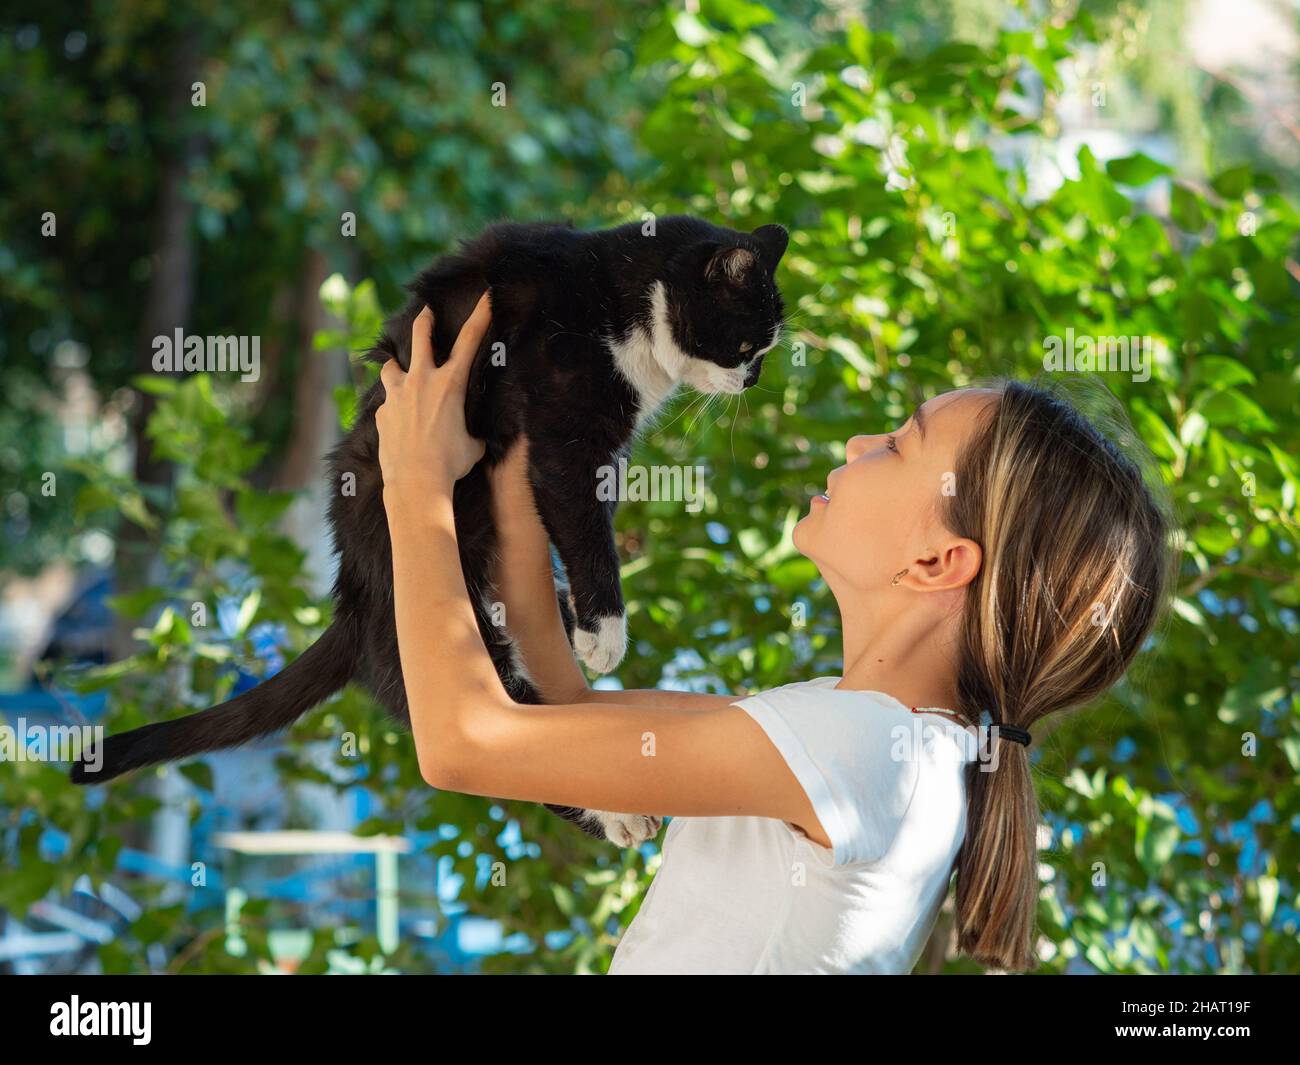 Teenager girl holds a black stray cat in her arms and looks at him. Animal care concept. Stock Photo